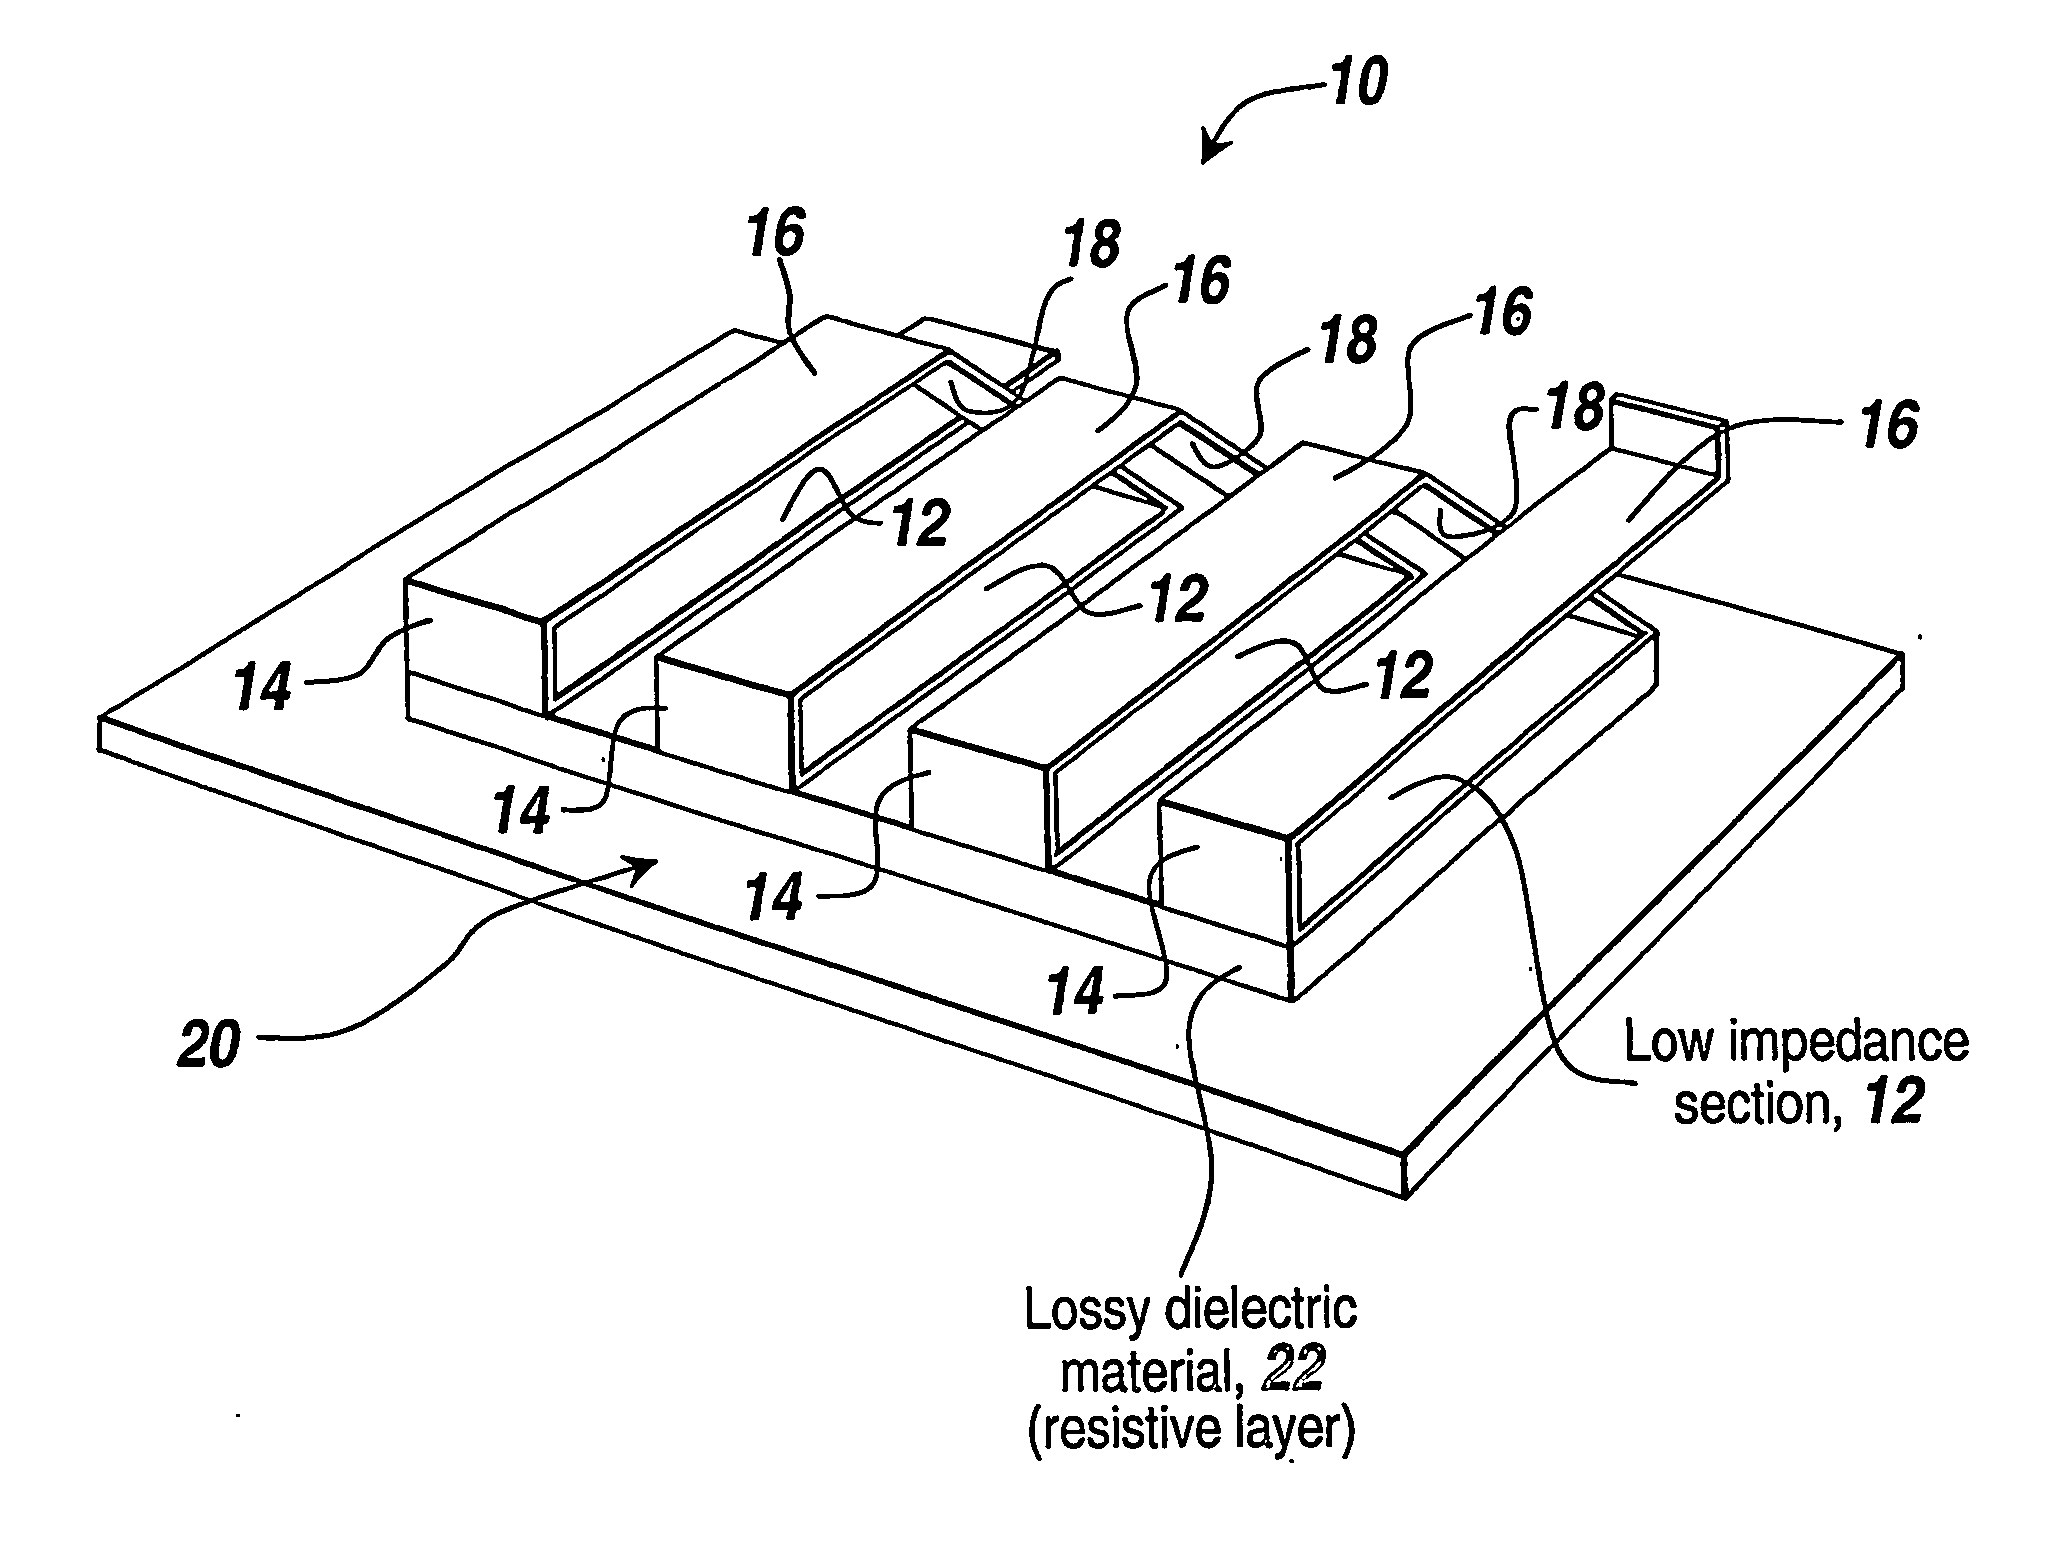 Method and apparatus for limiting vswr spikes in a compact broadband meander line loaded antenna assembly